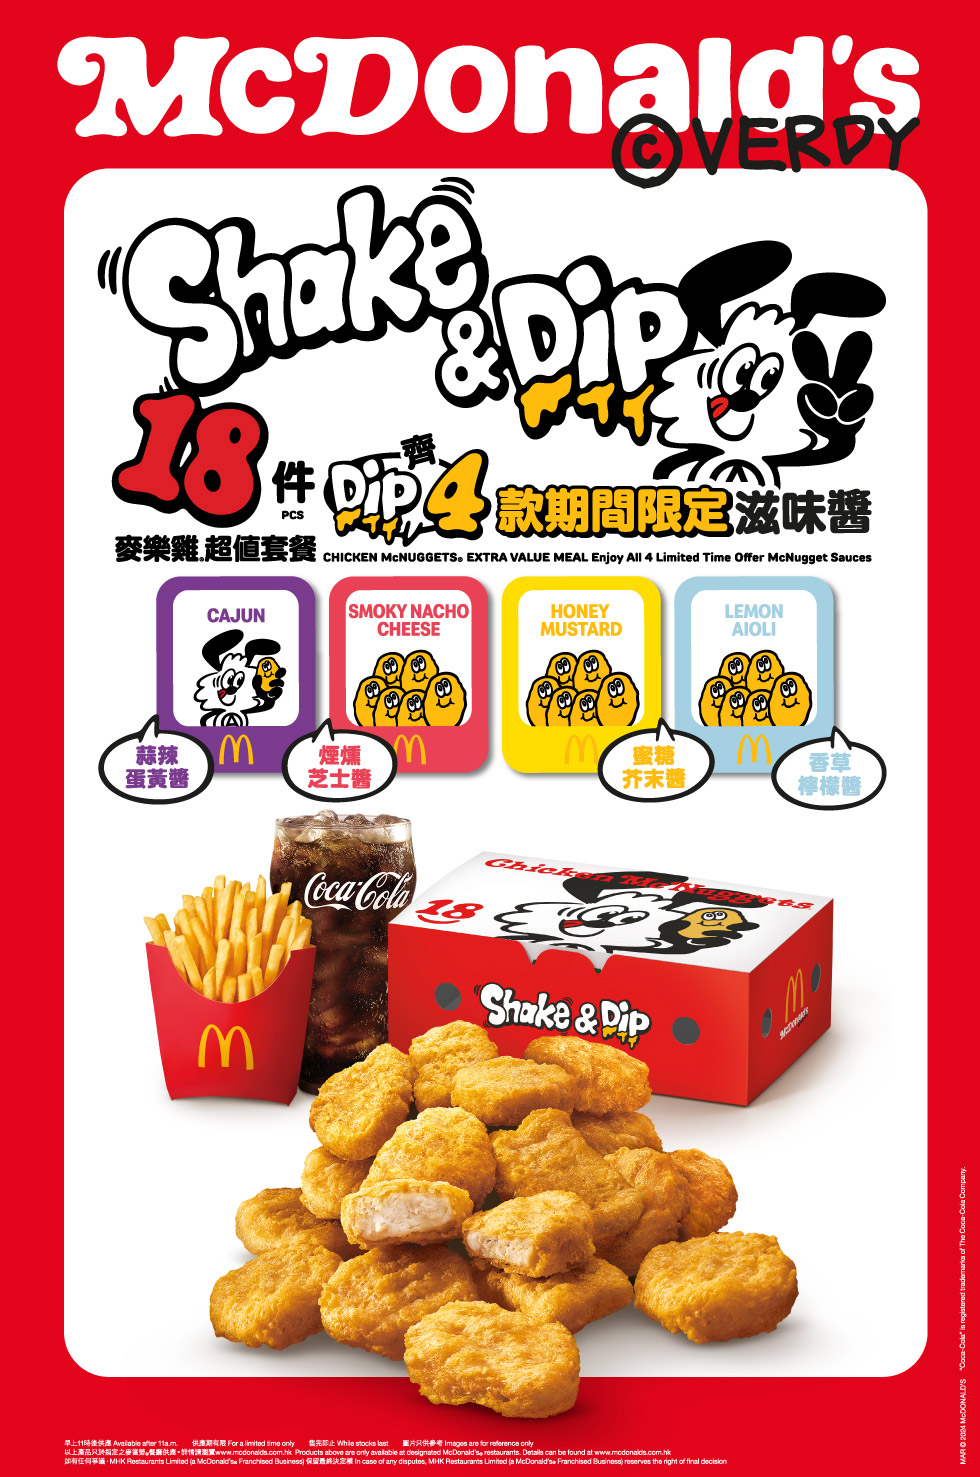 McDonald's Shake & Dip! The limited time offer McNugget sauces and McShaker Fries🍟are back!